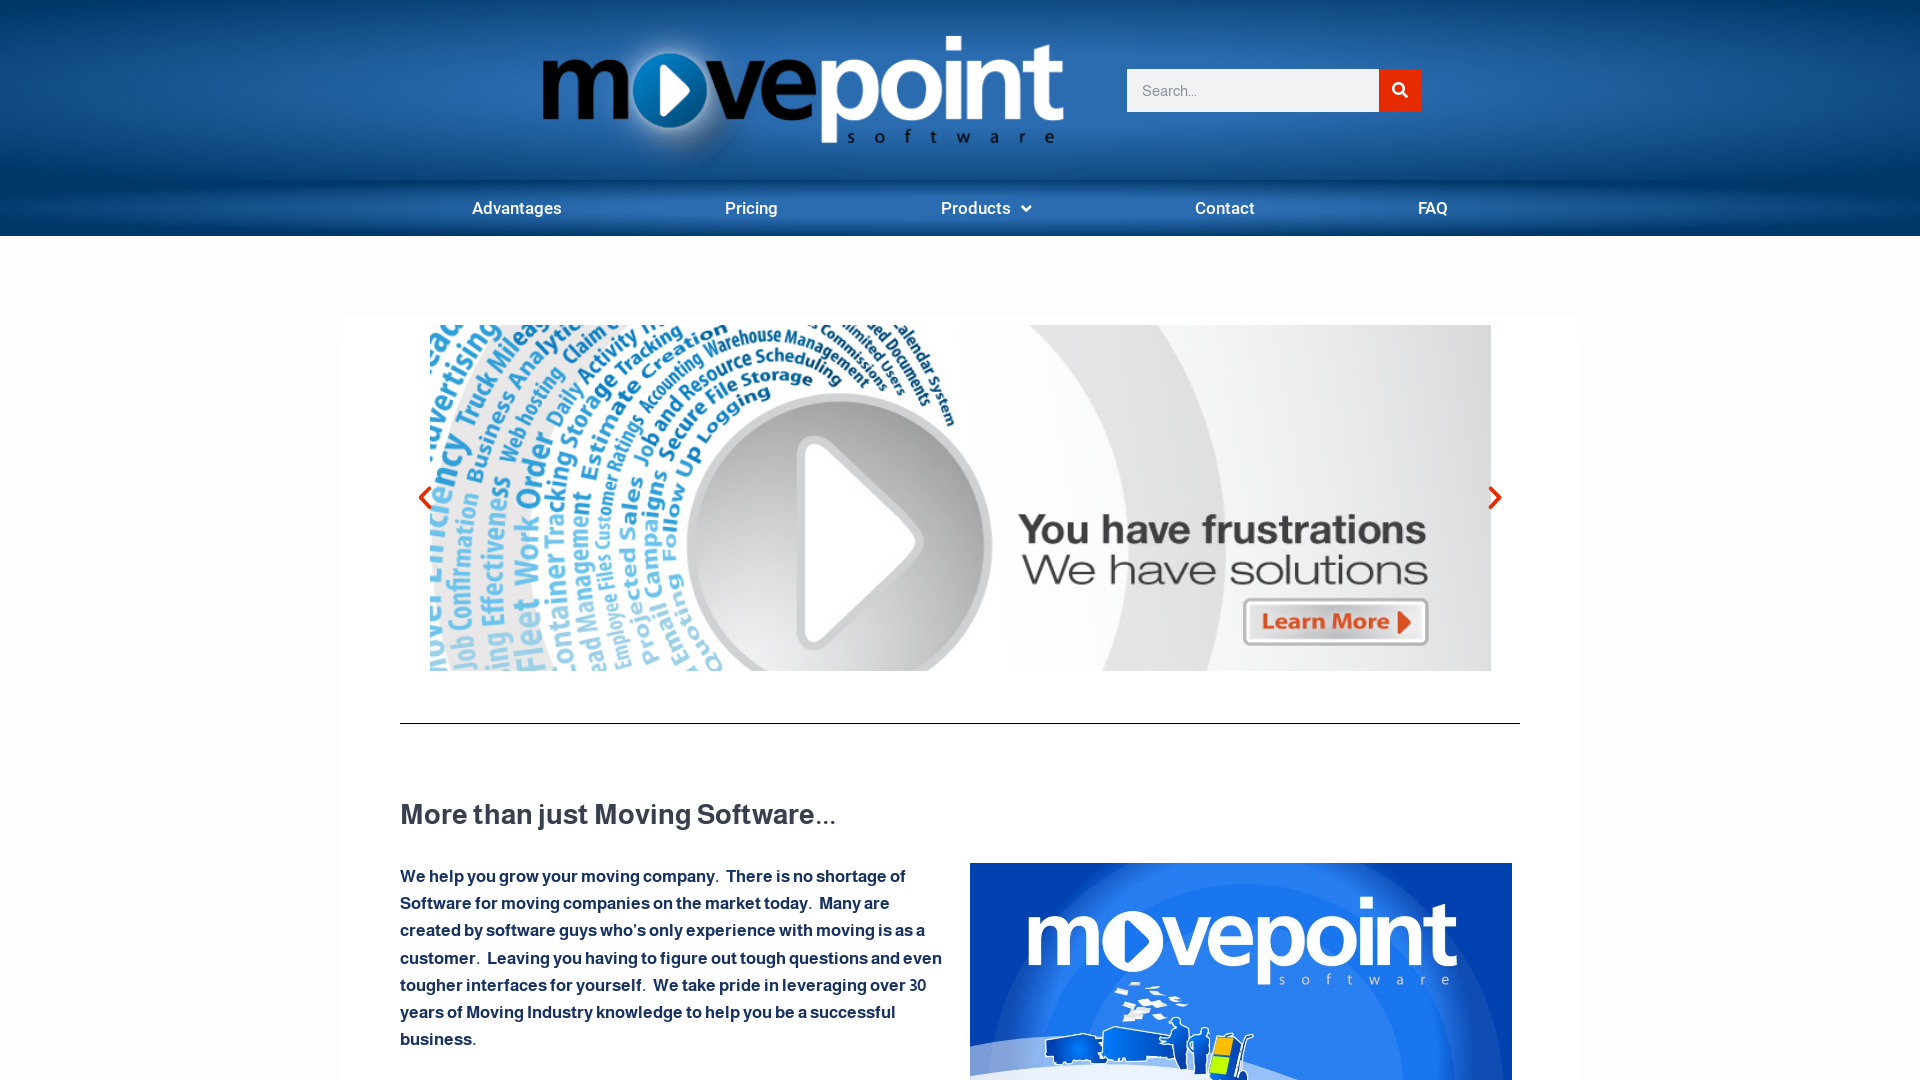 MovePoint